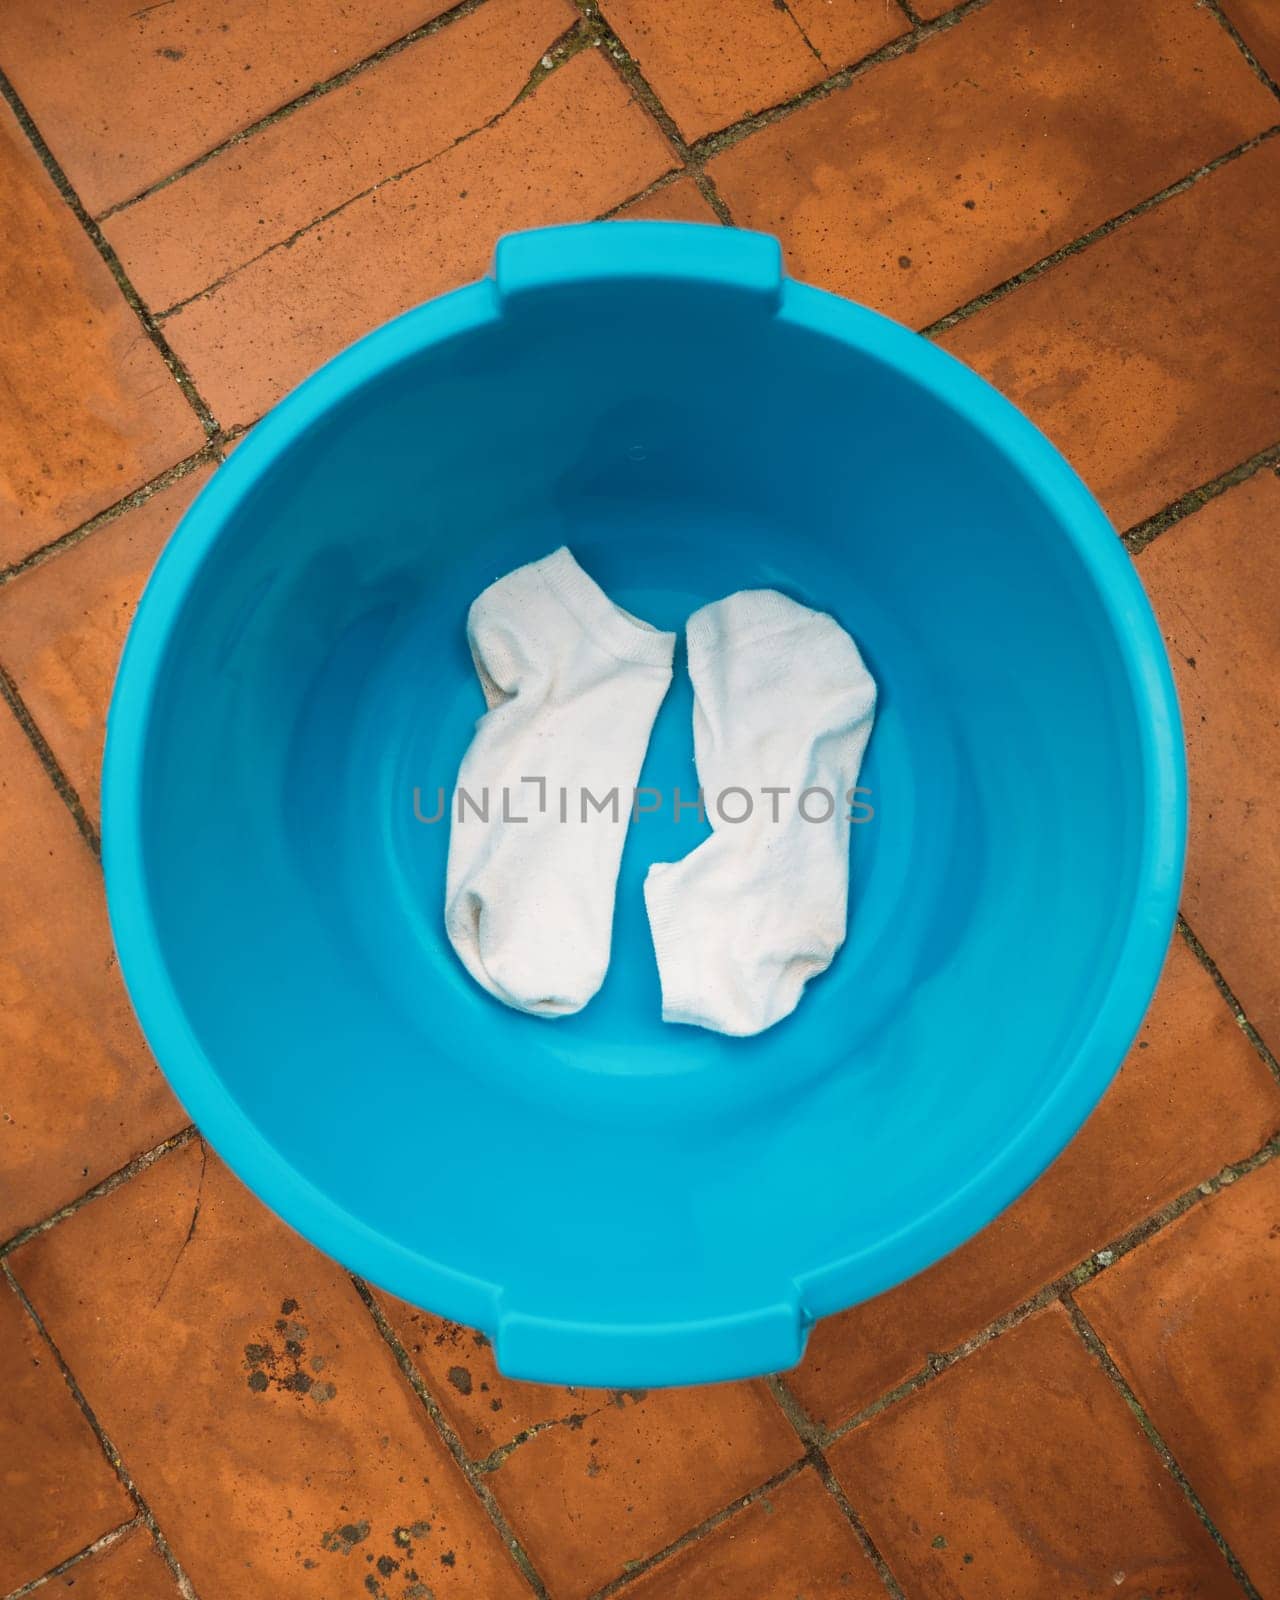 A pair of white socks in a blue plastic basin.